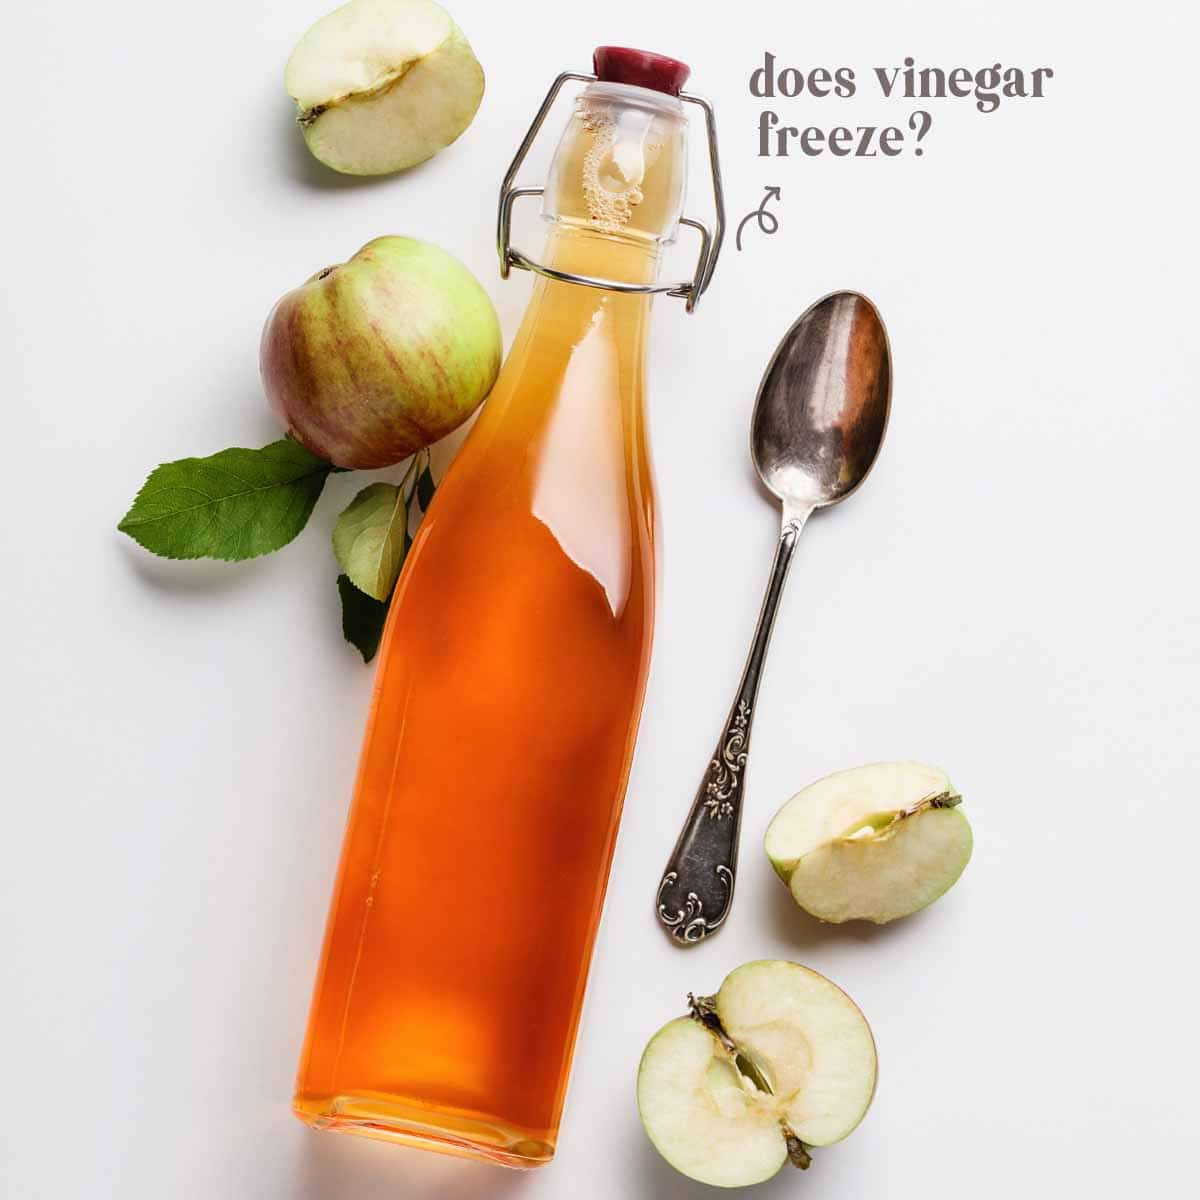 Similarly, if vinegar is frozen for long periods, it will also lose some of its acidity and flavor. That's why it is recommended that you only use previously frozen vinegar for cooking, except when you're pickling something.